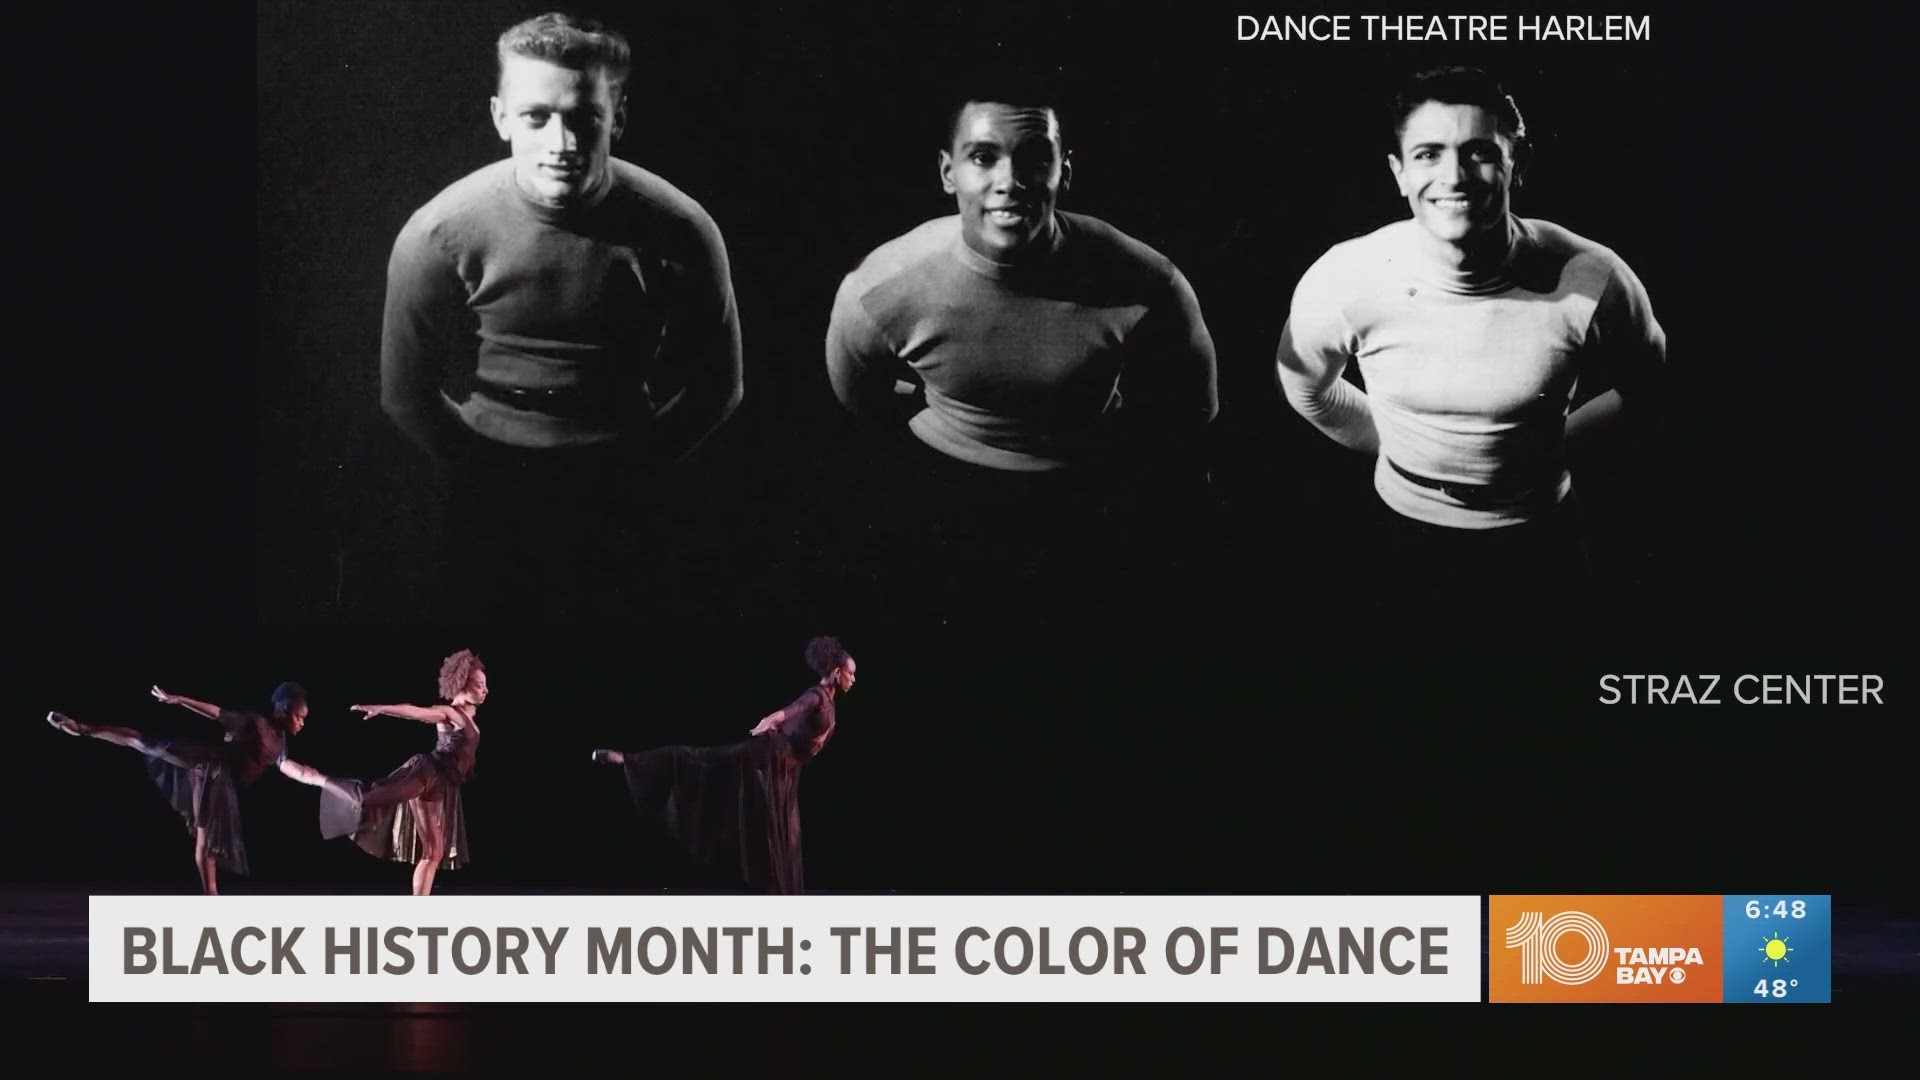 In the 1960s, Arthur Mitchell created Dance Theatre of Harlem as a place for dancers of all races to come together. Now, one member is bringing dance to Tampa Bay.